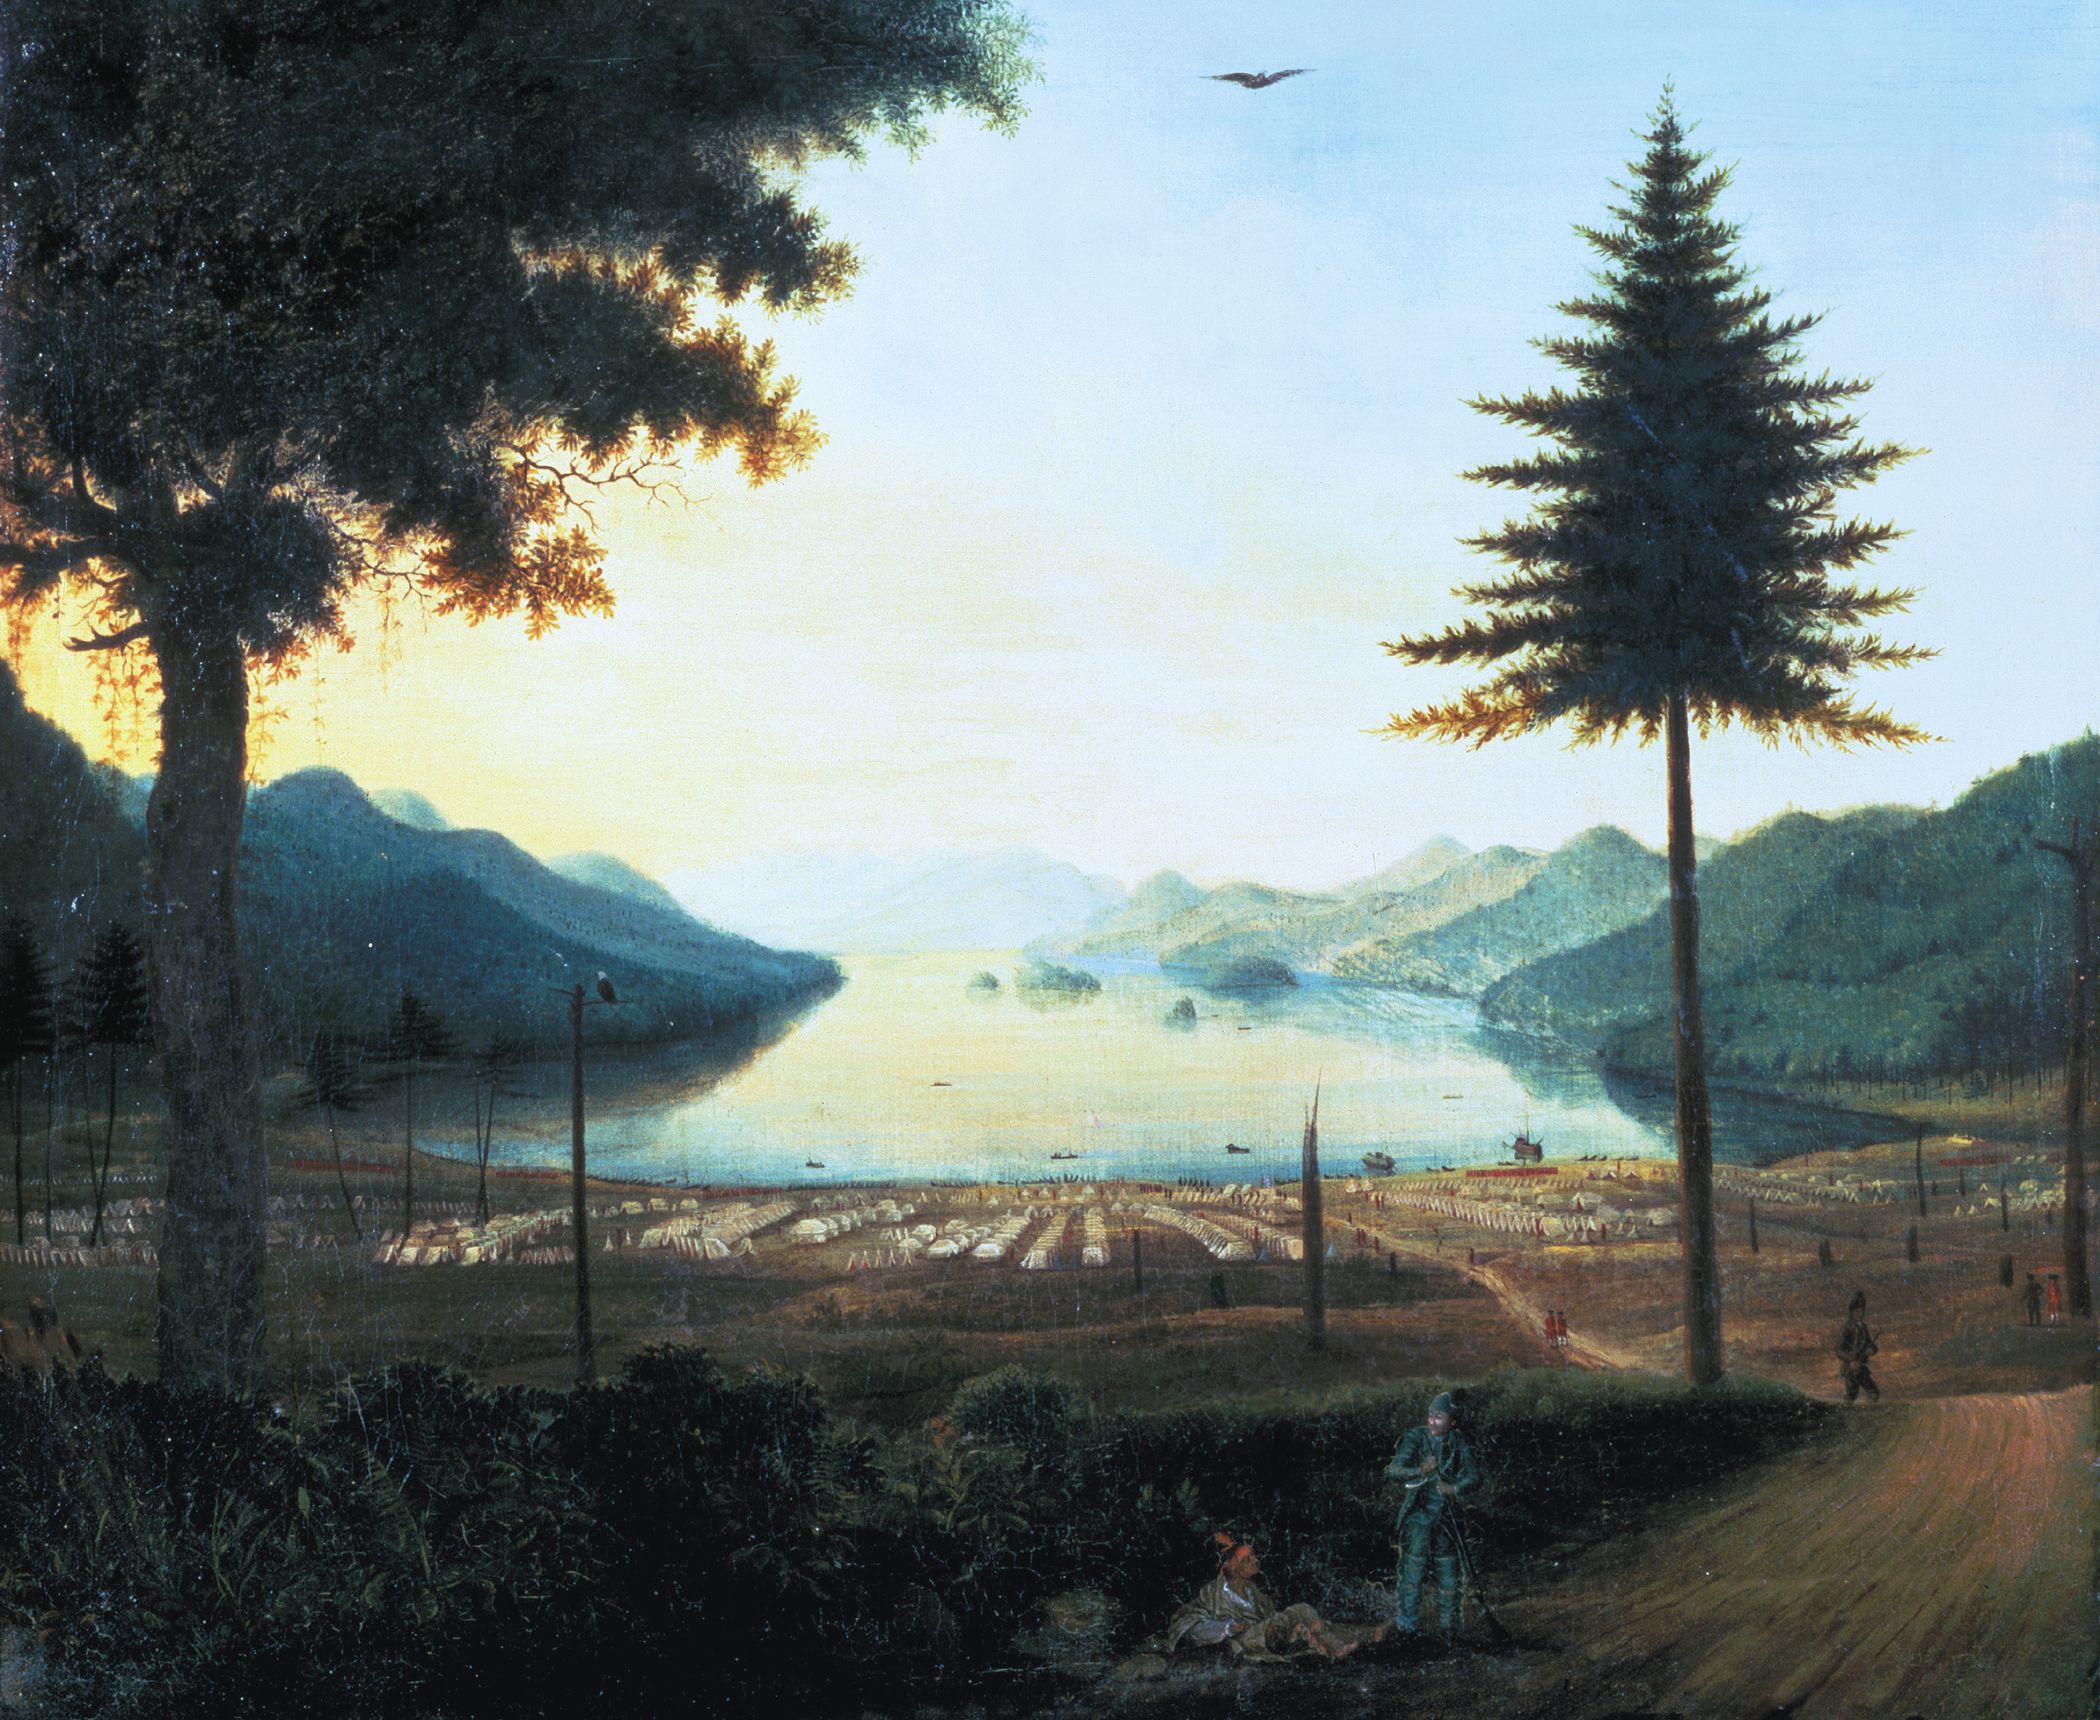 This period image of a British encampment on Lake George was painted in 1759 by Thomas Davies.